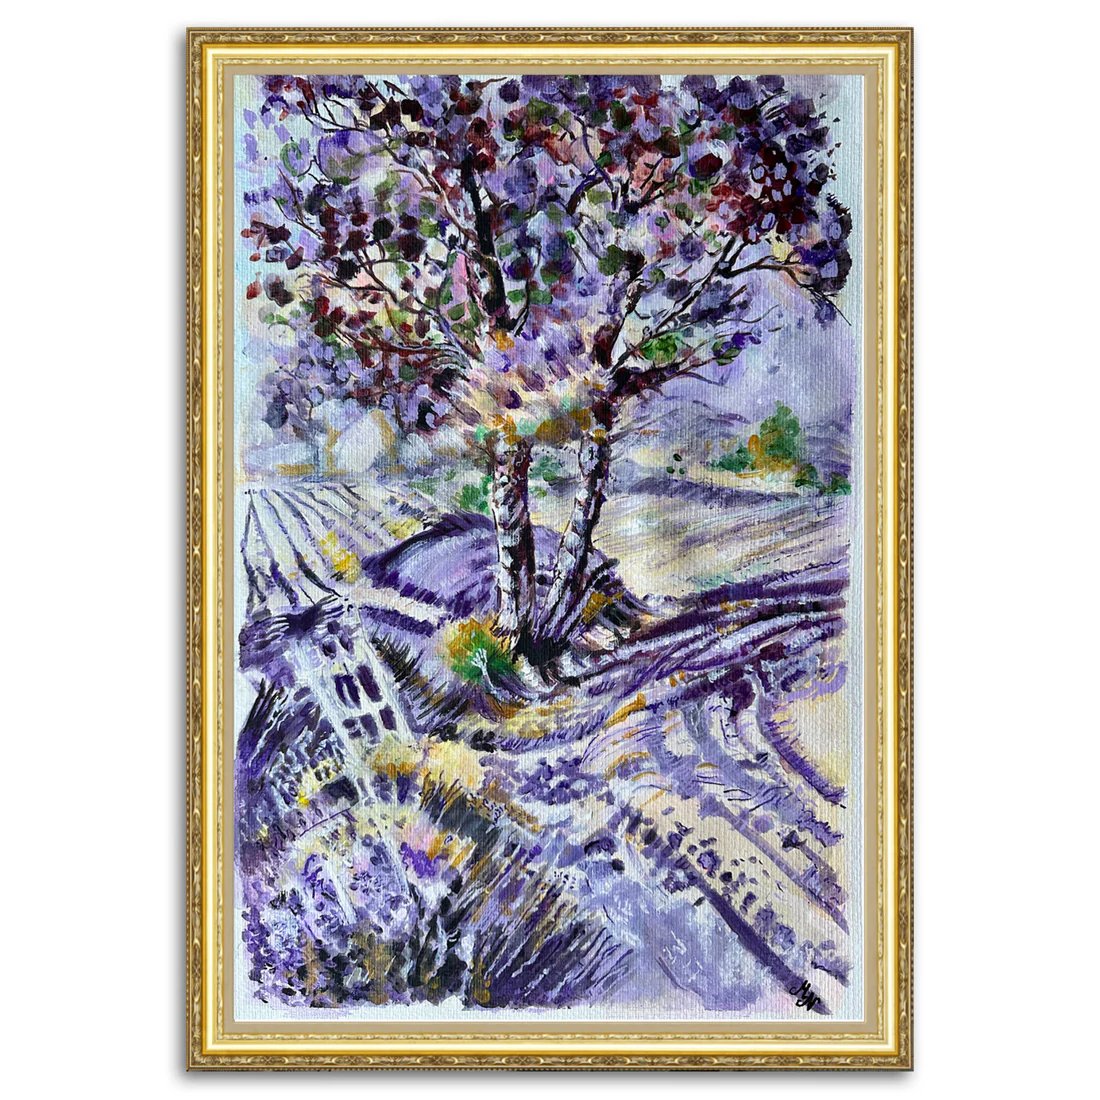 'Lavender Dreamscape II' is an impressionistic painting that transports viewers to a serene world of natural beauty. By @MistyLady4 #art #painting #naturelovers #lavender artcursor.com/products/laven…